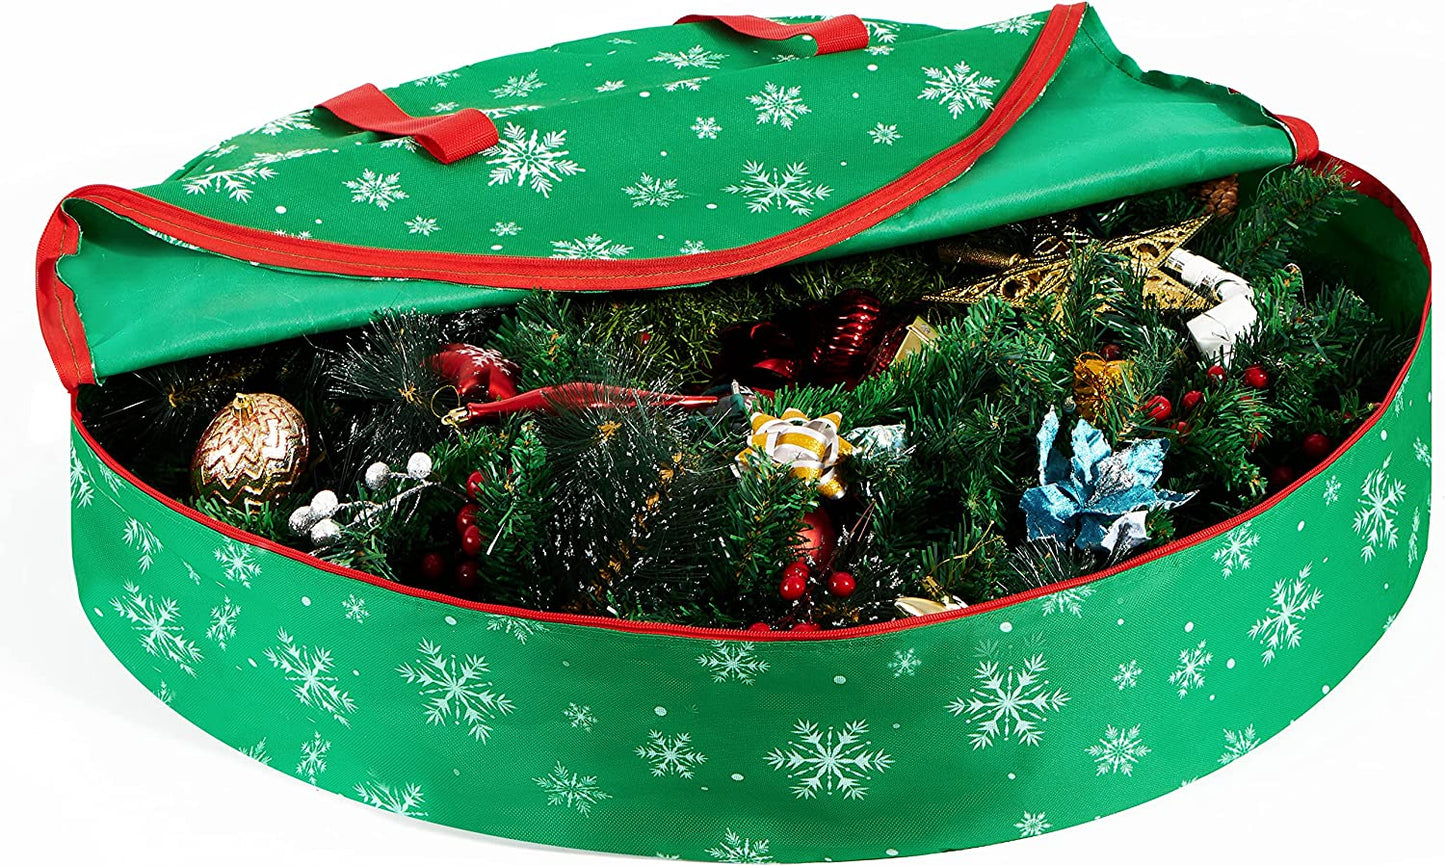 Snowflake Patterned Christmas Wreath Oxford Storage Bag (Green)